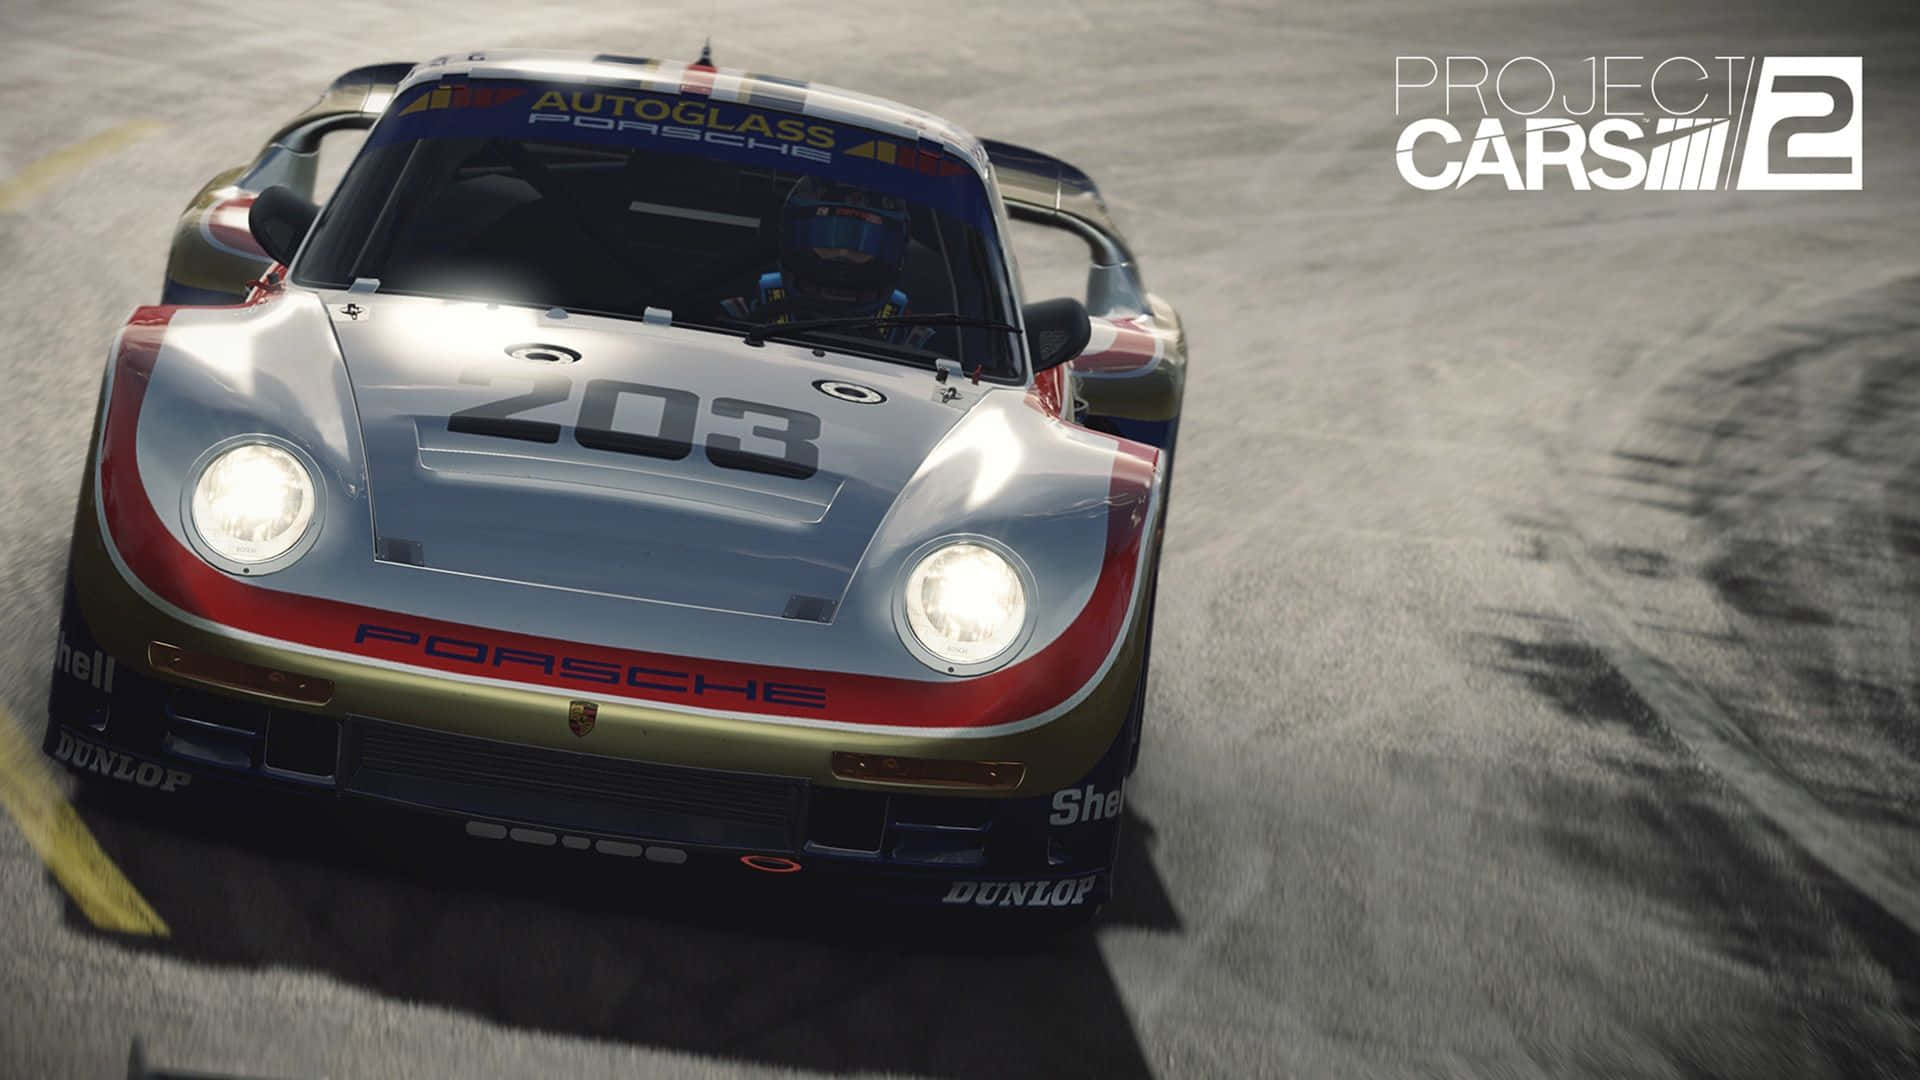 Hd Project Cars Background Wallpaper